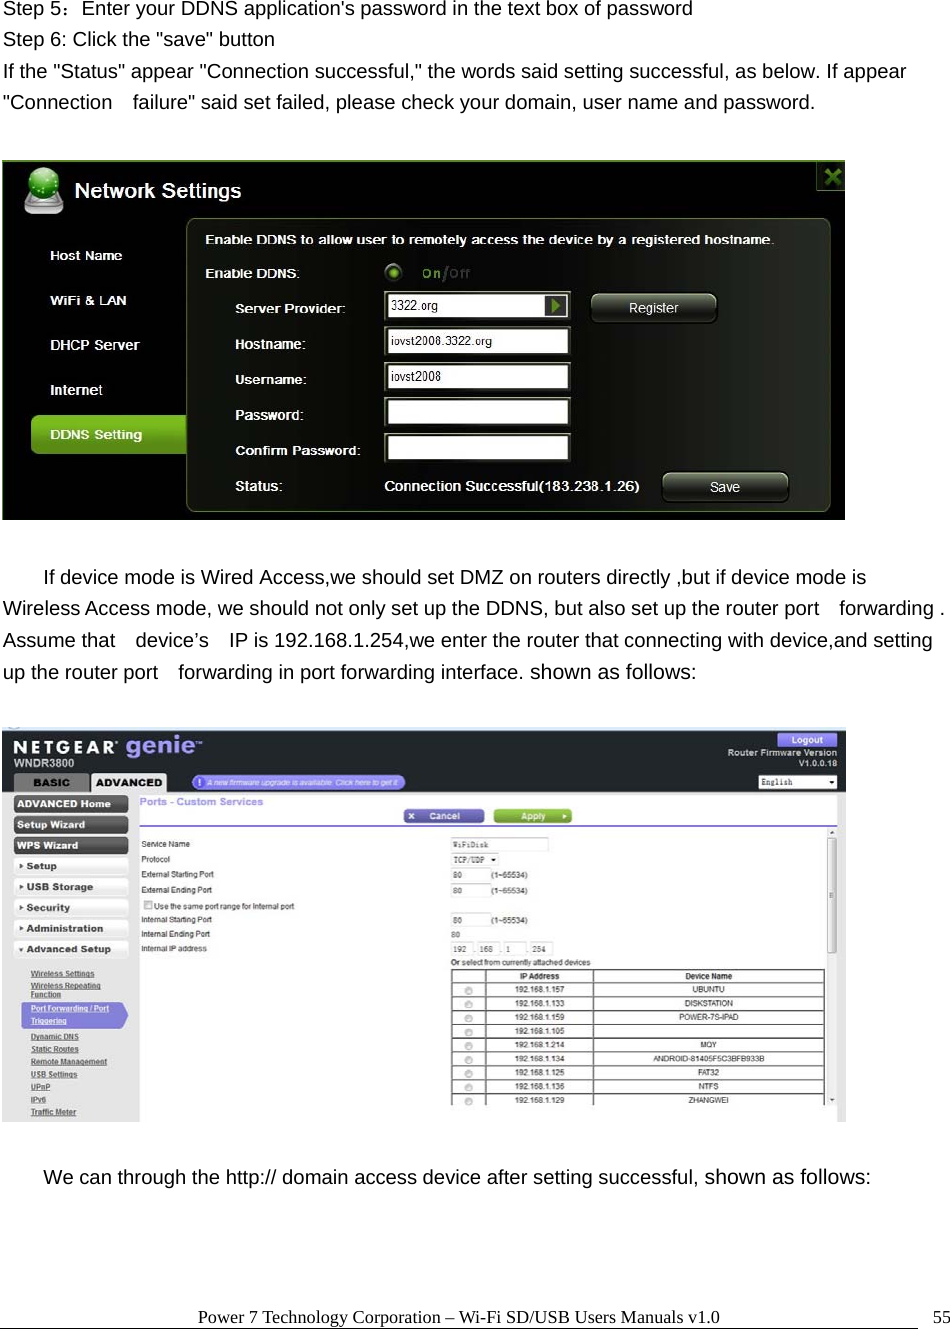 Power 7 Technology Corporation – Wi-Fi SD/USB Users Manuals v1.0  55Step 5：Enter your DDNS application&apos;s password in the text box of password Step 6: Click the &quot;save&quot; button If the &quot;Status&quot; appear &quot;Connection successful,&quot; the words said setting successful, as below. If appear &quot;Connection    failure&quot; said set failed, please check your domain, user name and password.    If device mode is Wired Access,we should set DMZ on routers directly ,but if device mode is   Wireless Access mode, we should not only set up the DDNS, but also set up the router port    forwarding . Assume that    device’s    IP is 192.168.1.254,we enter the router that connecting with device,and setting up the router port    forwarding in port forwarding interface. shown as follows:    We can through the http:// domain access device after setting successful, shown as follows: 